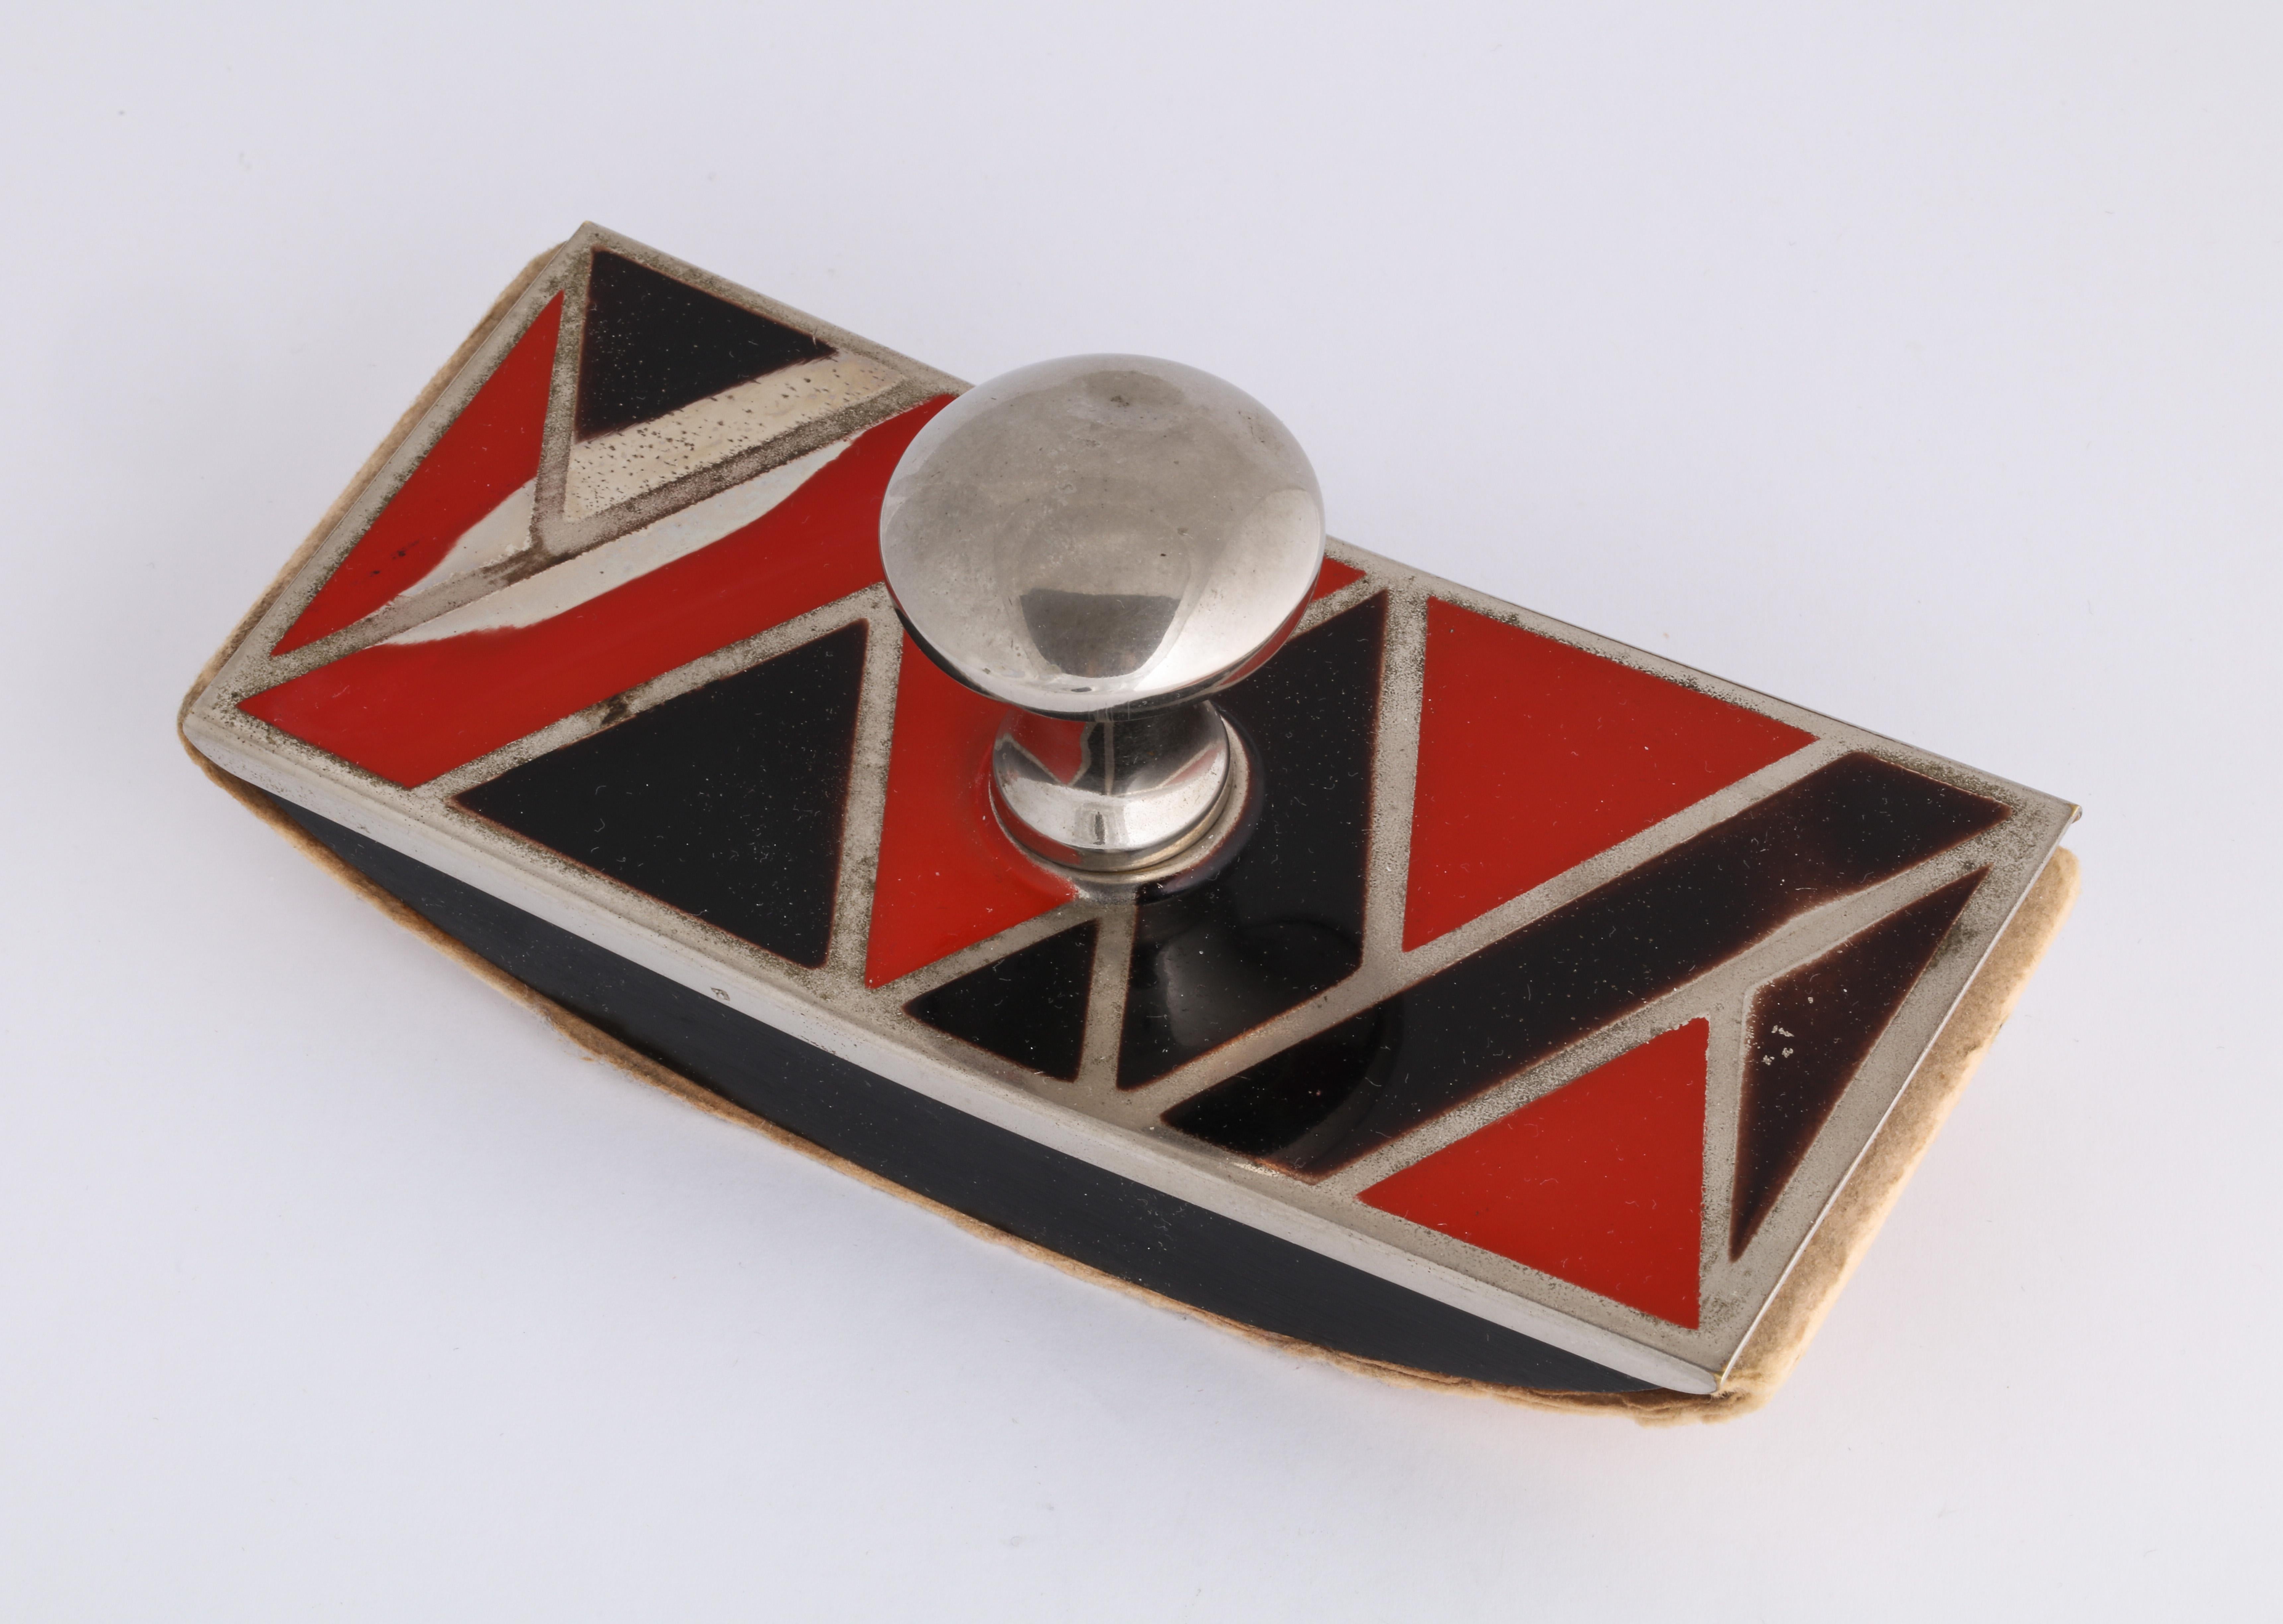 Metal with enamel in geometric design. Triangles and rectangles in black and red enamel with silver metal outlining.